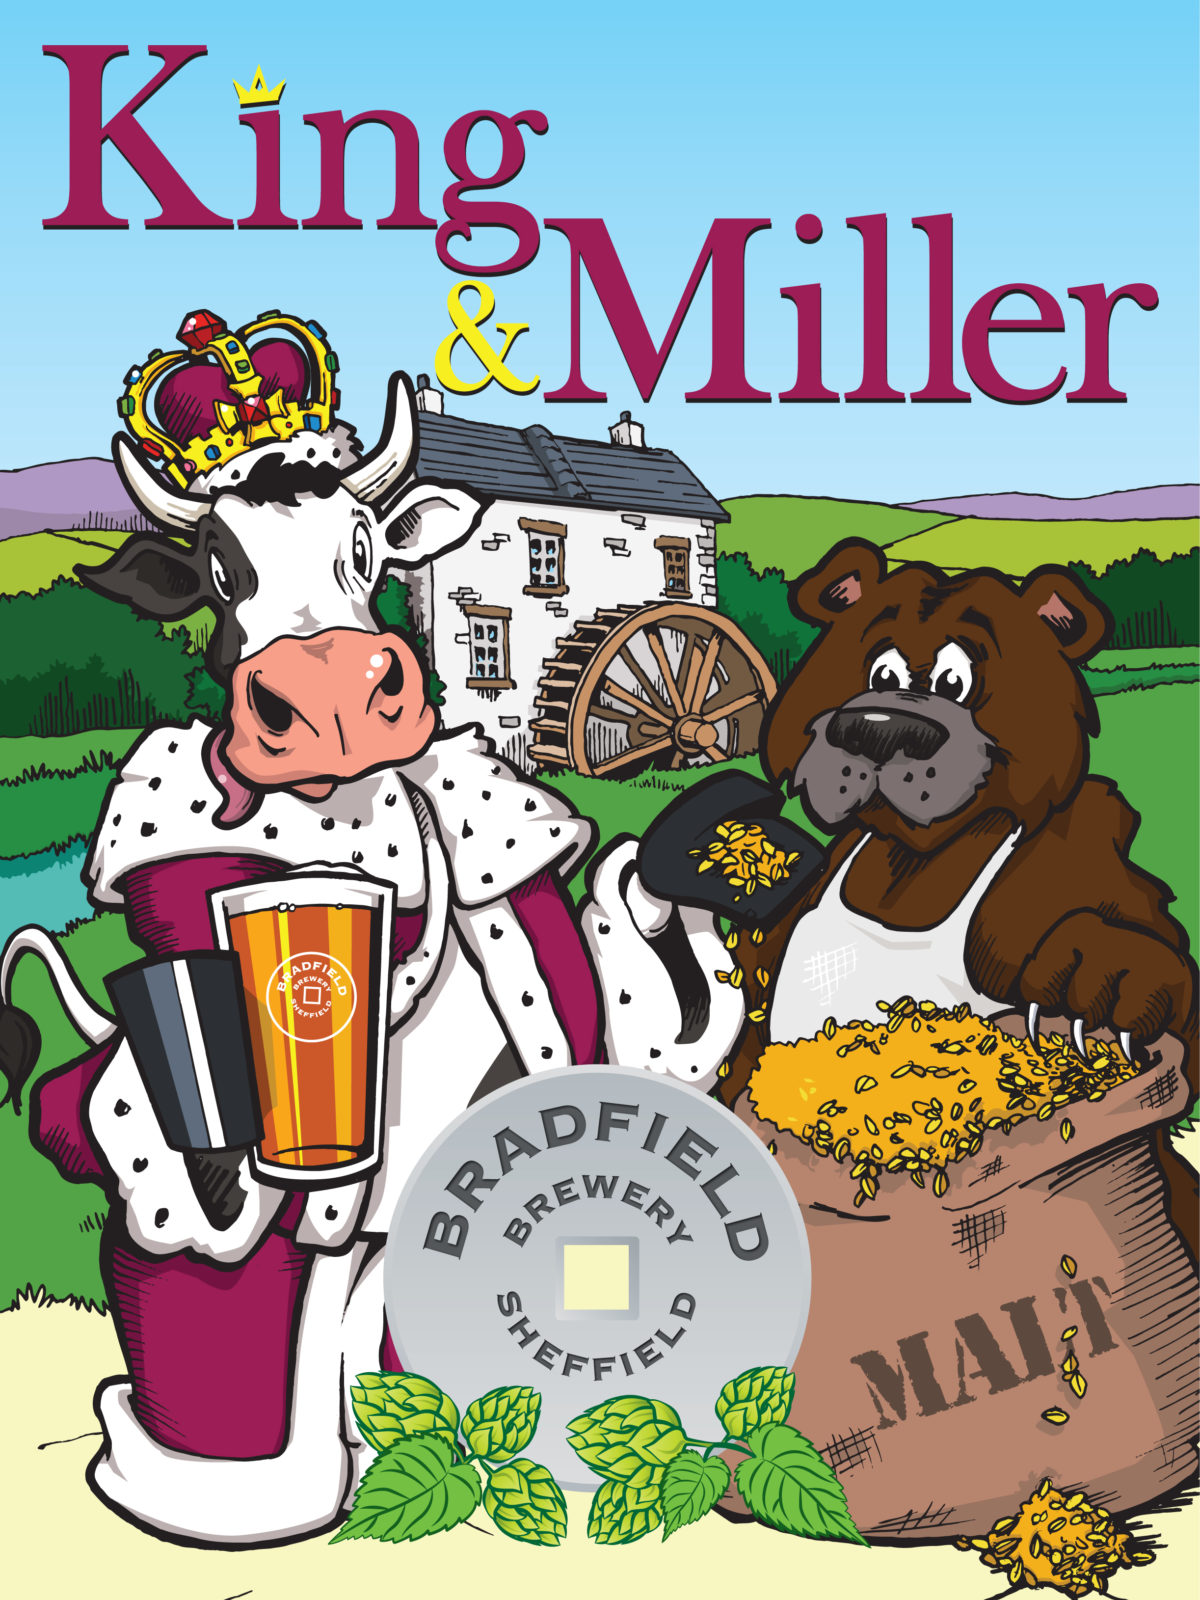 Bradfield Brewery’s King & Miller Reopens following takeover and revamp